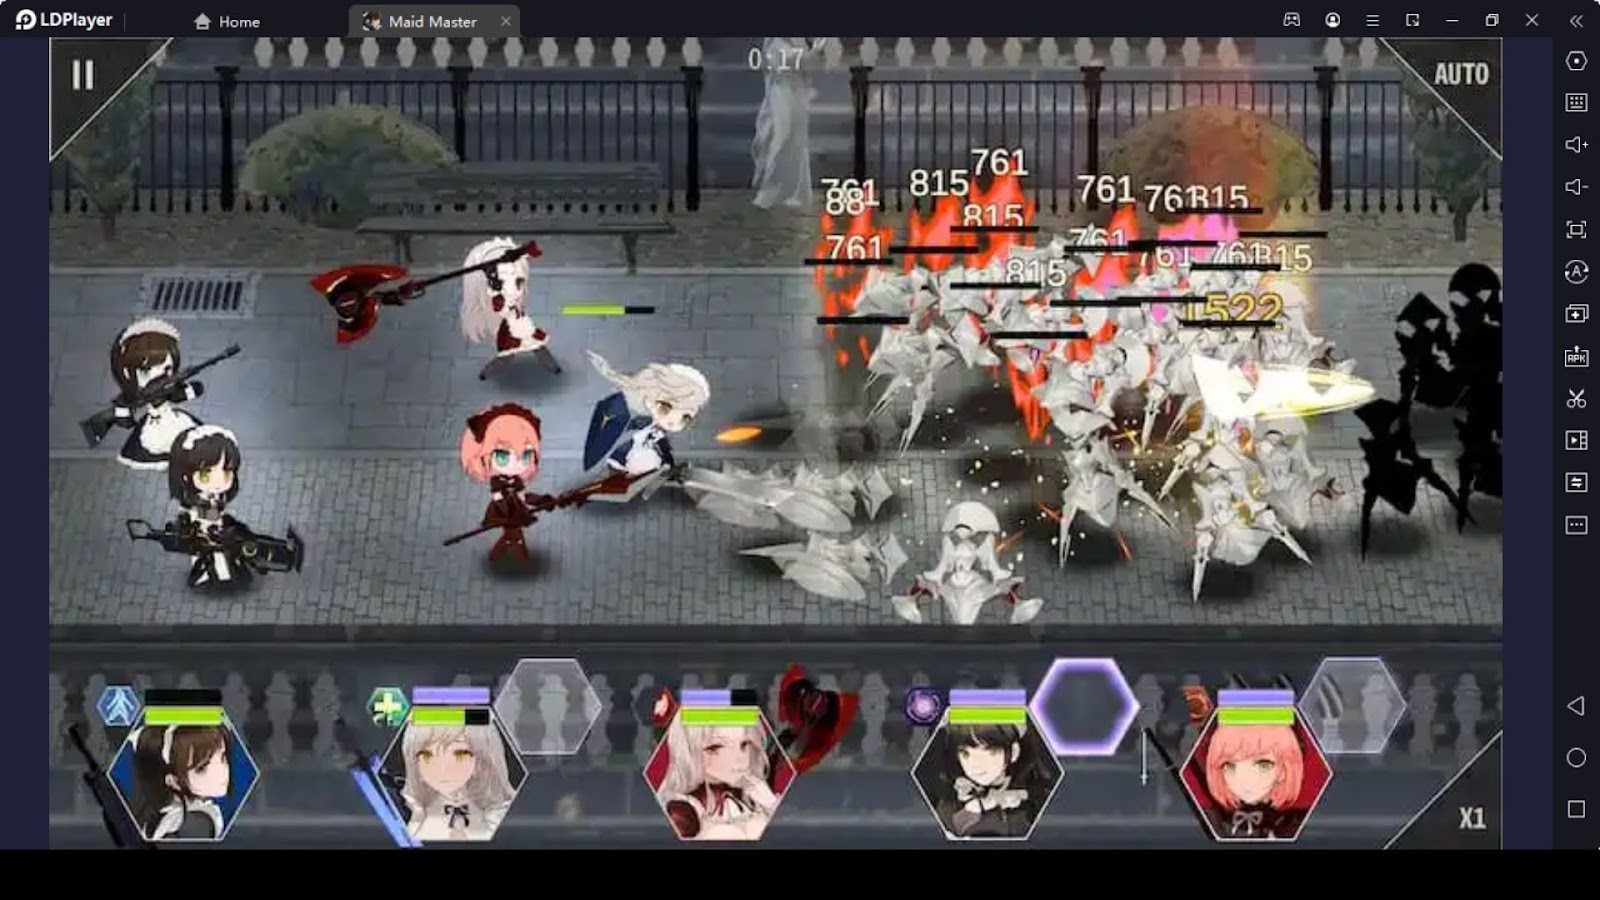 Increasing Your Battle Power In  Maid Master